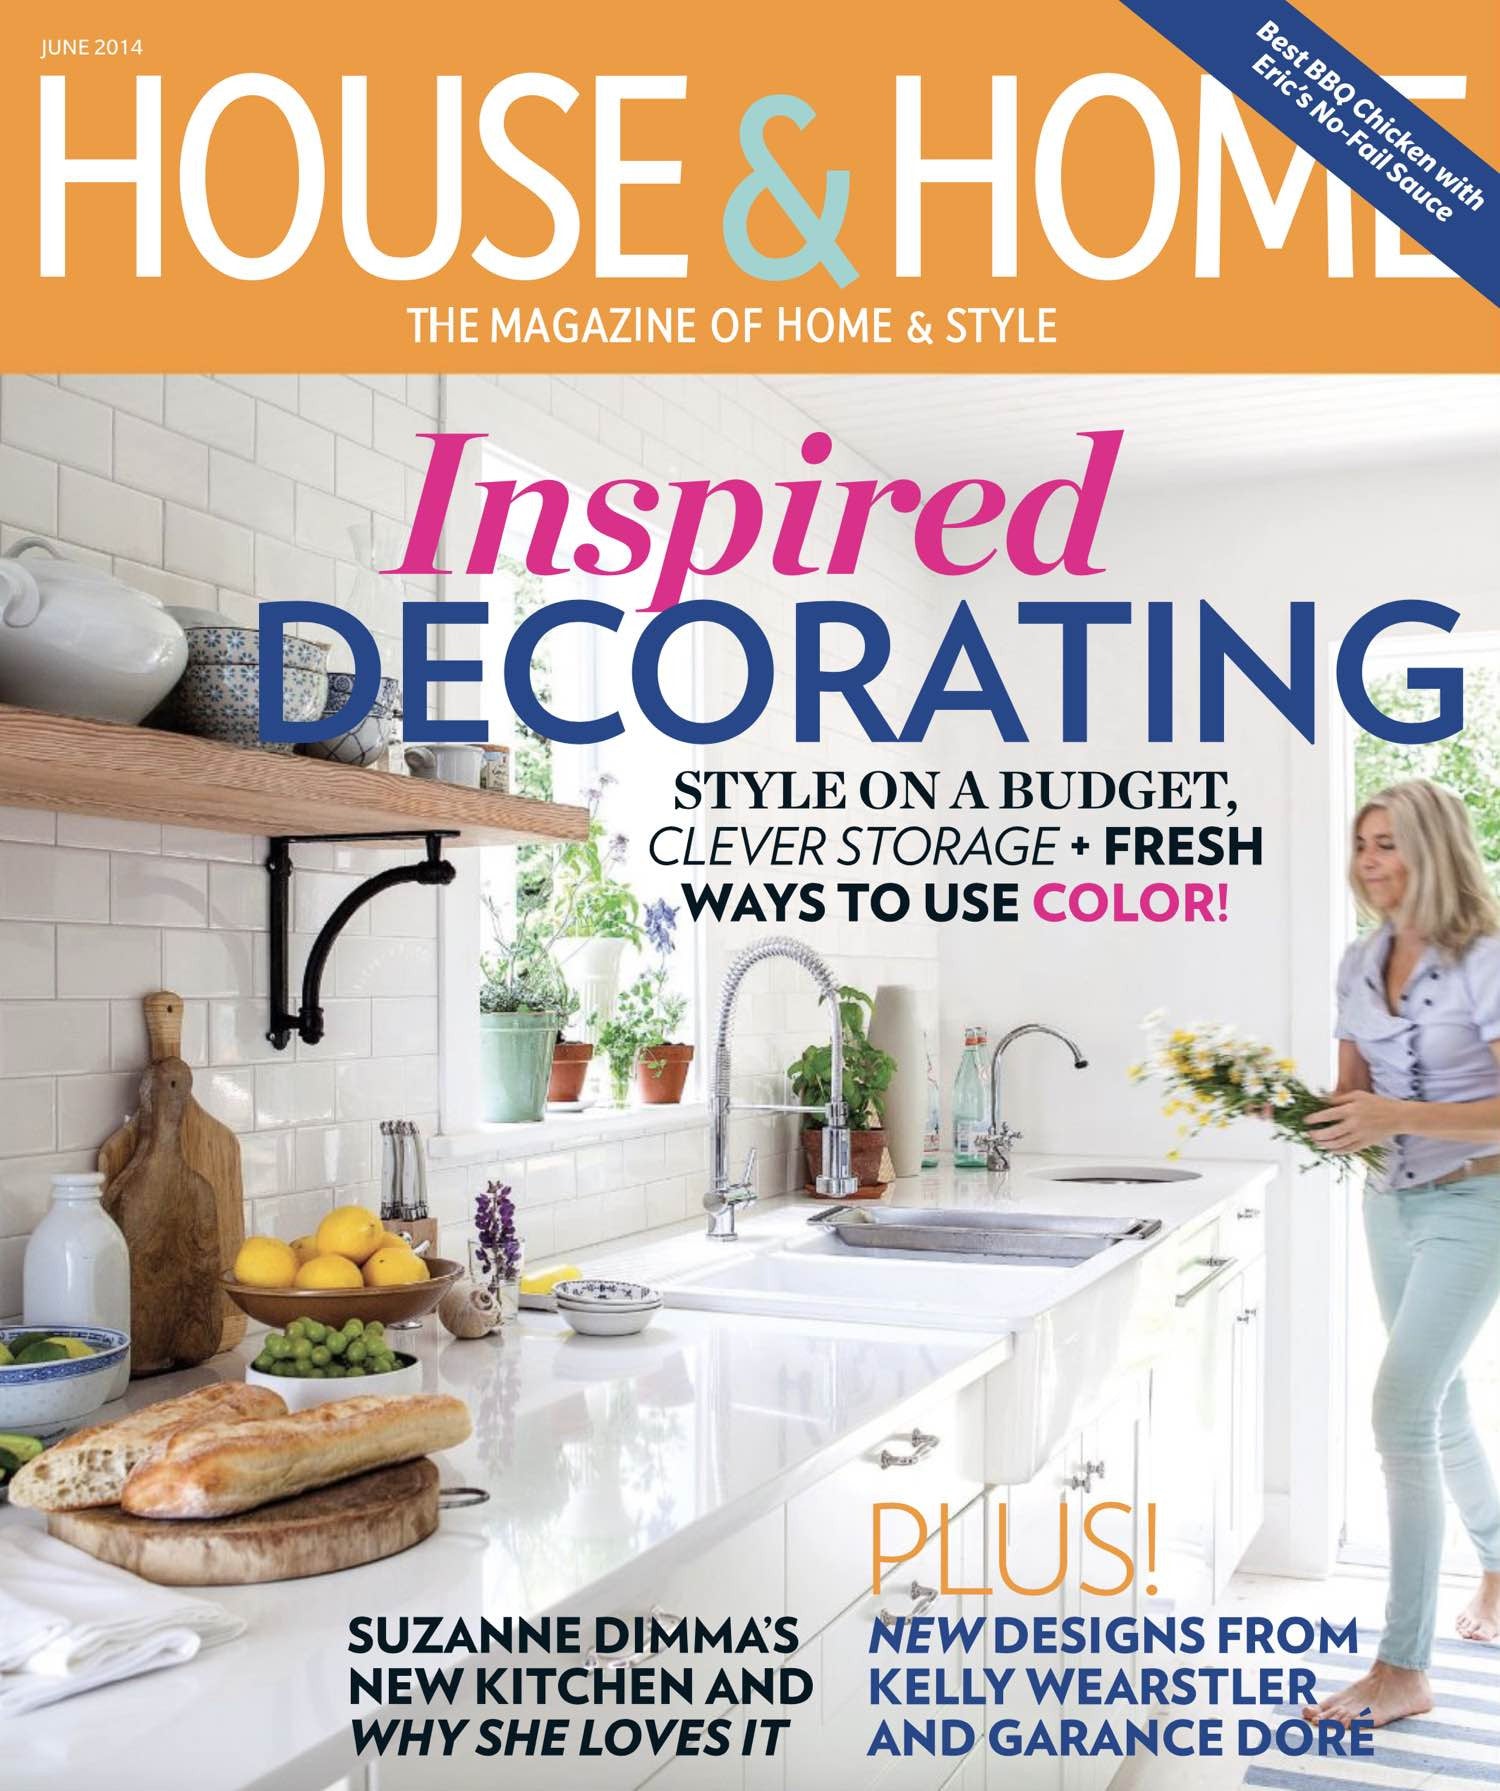 House & Home June 2014: Get The Look